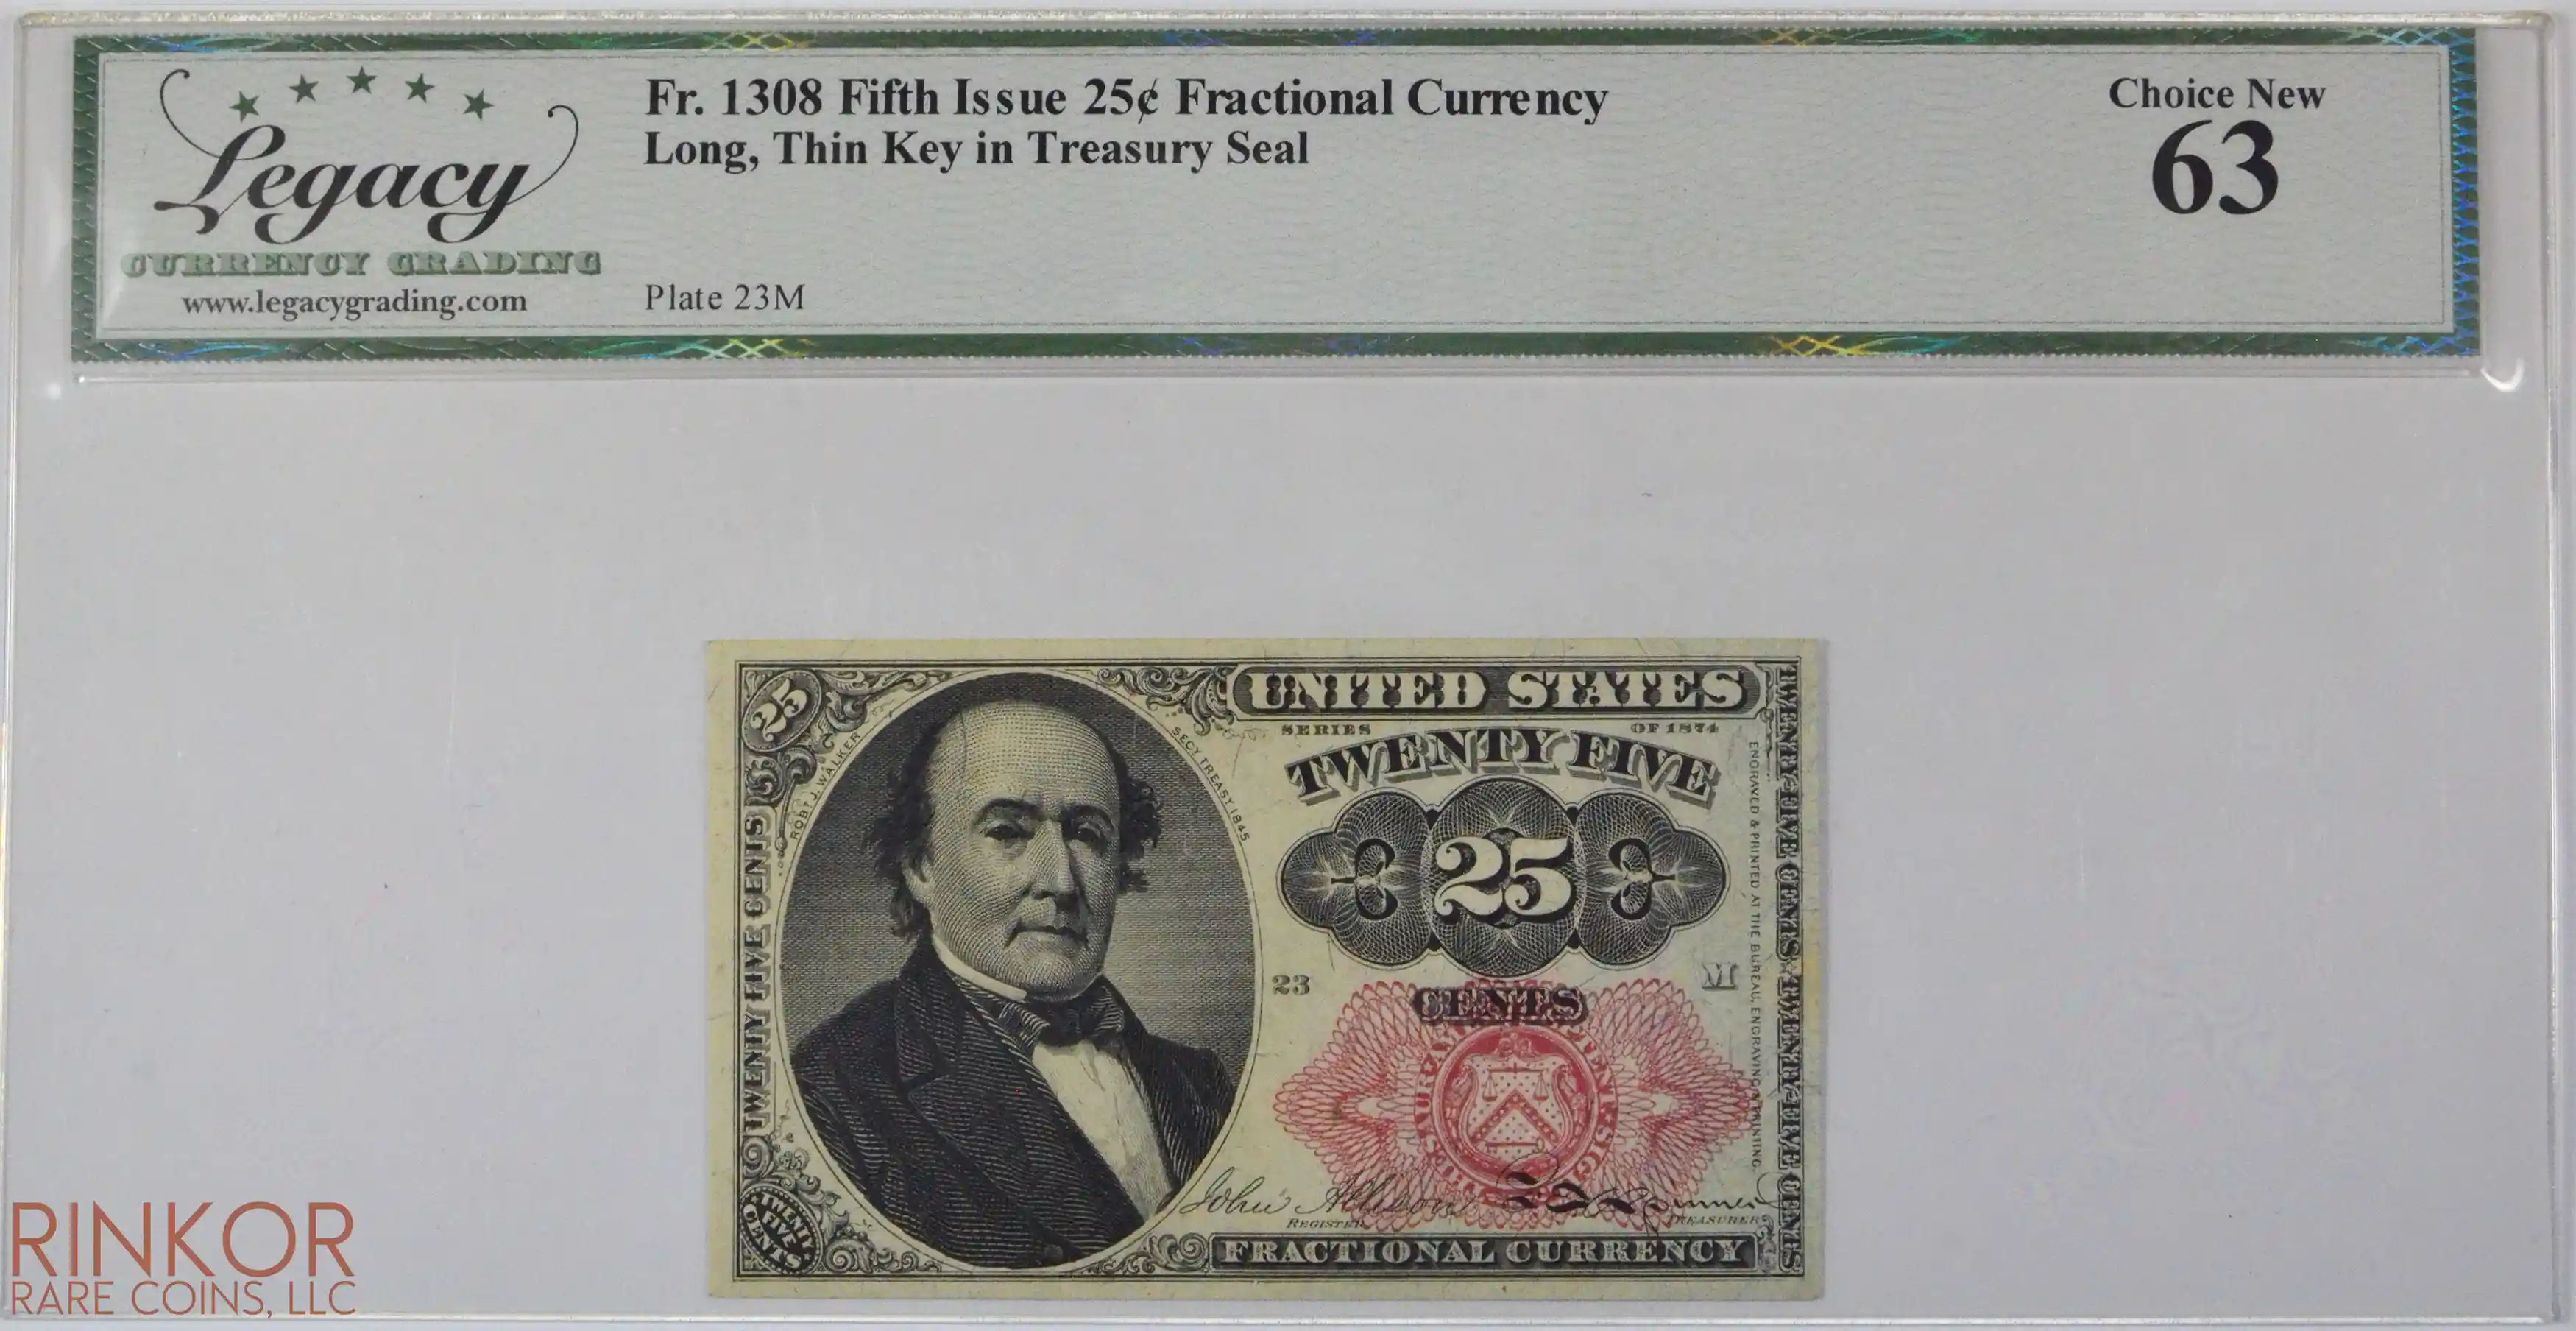 Fifth Issue 25 Cent Fr. 1308 Long Thin Key Fractional Currency LCG CU 63